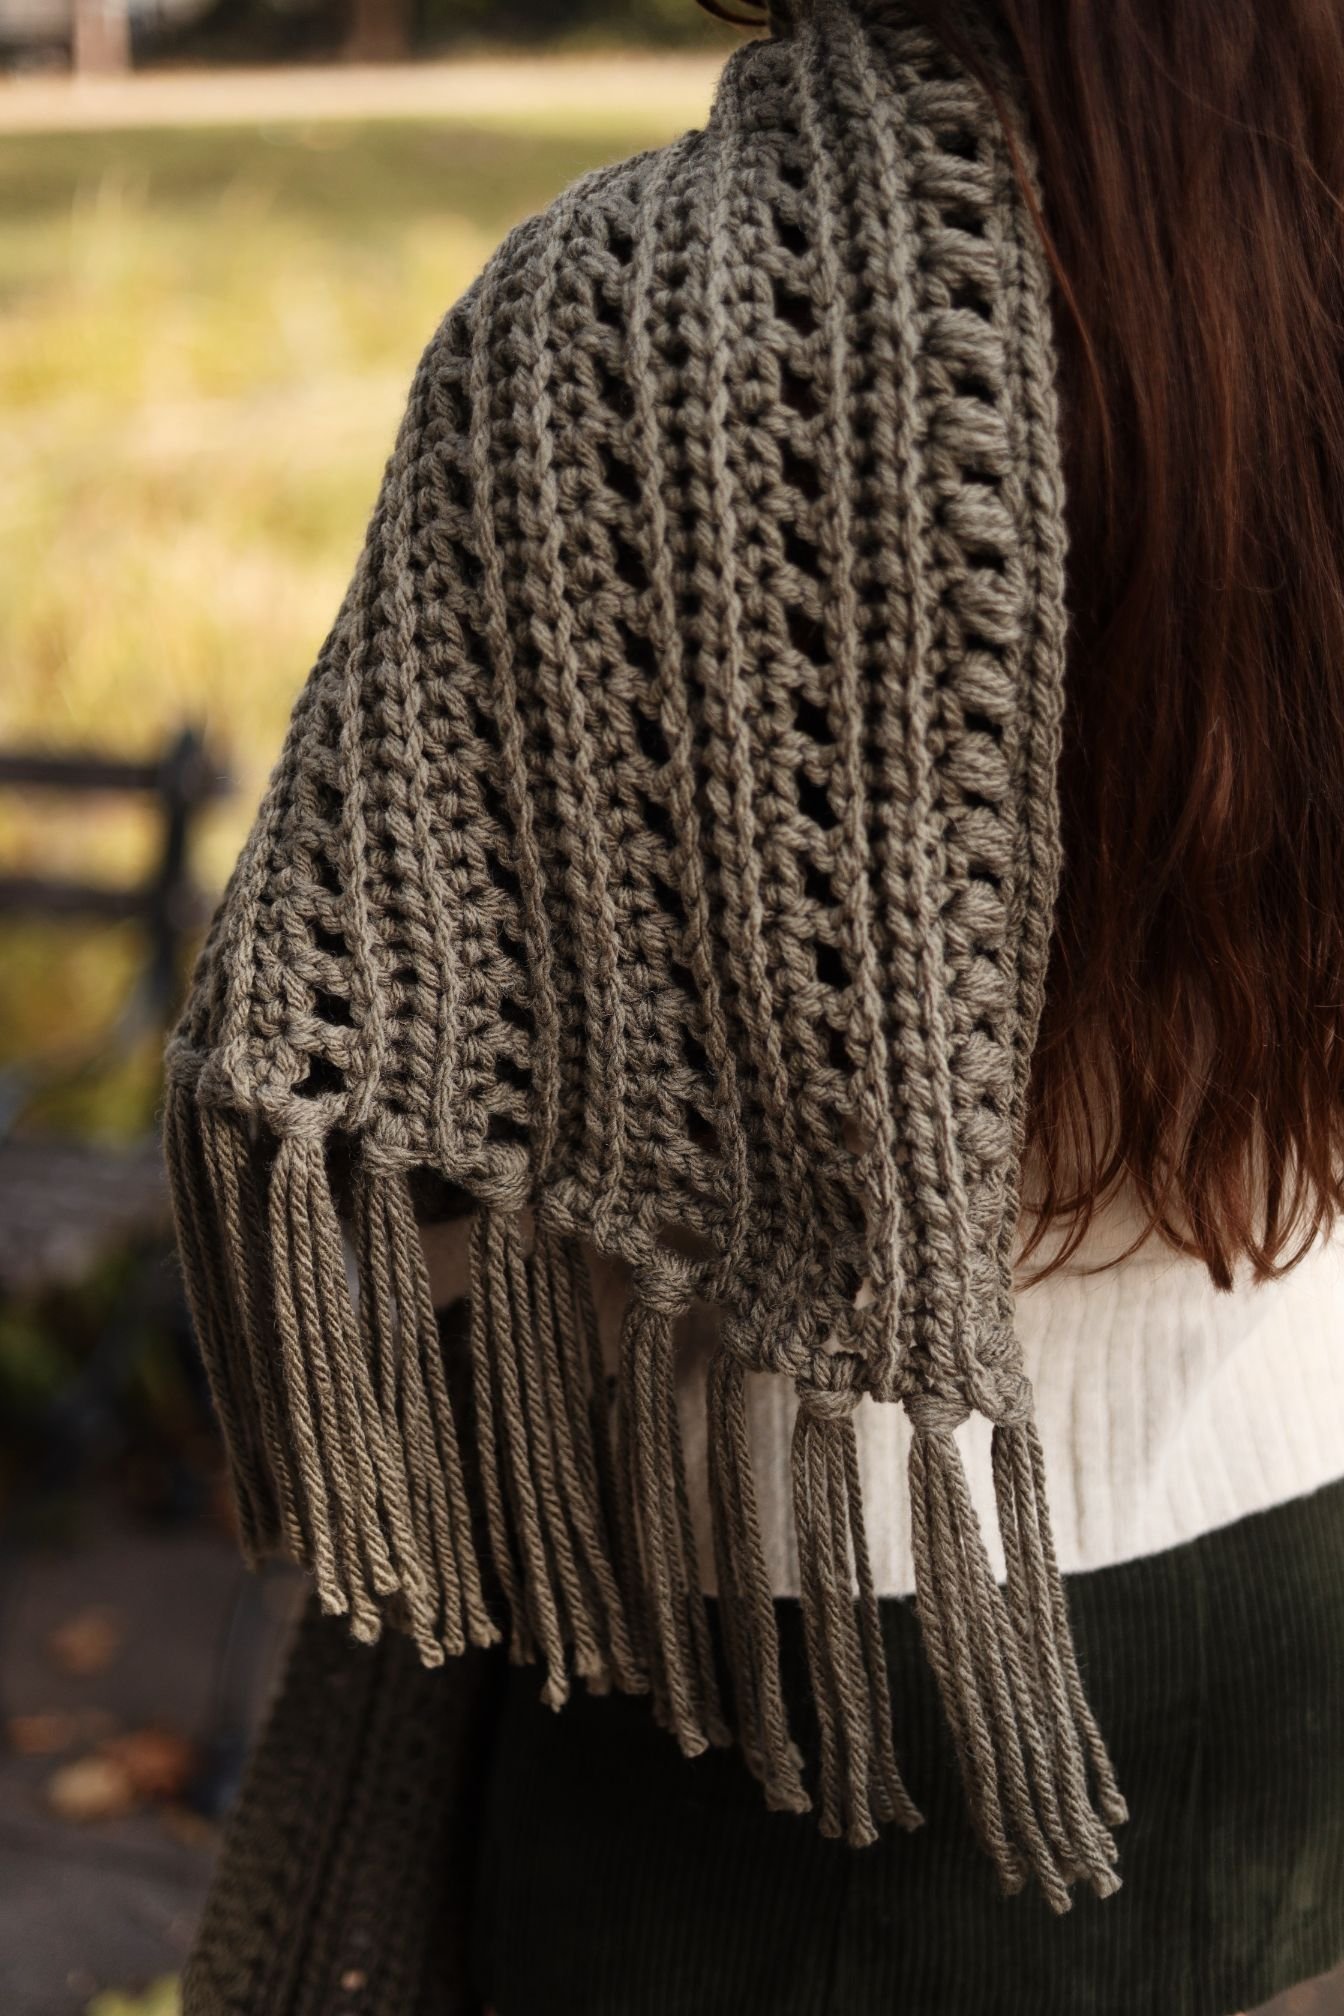 A Library Book Shawl you'll love for cozy reading and relaxing